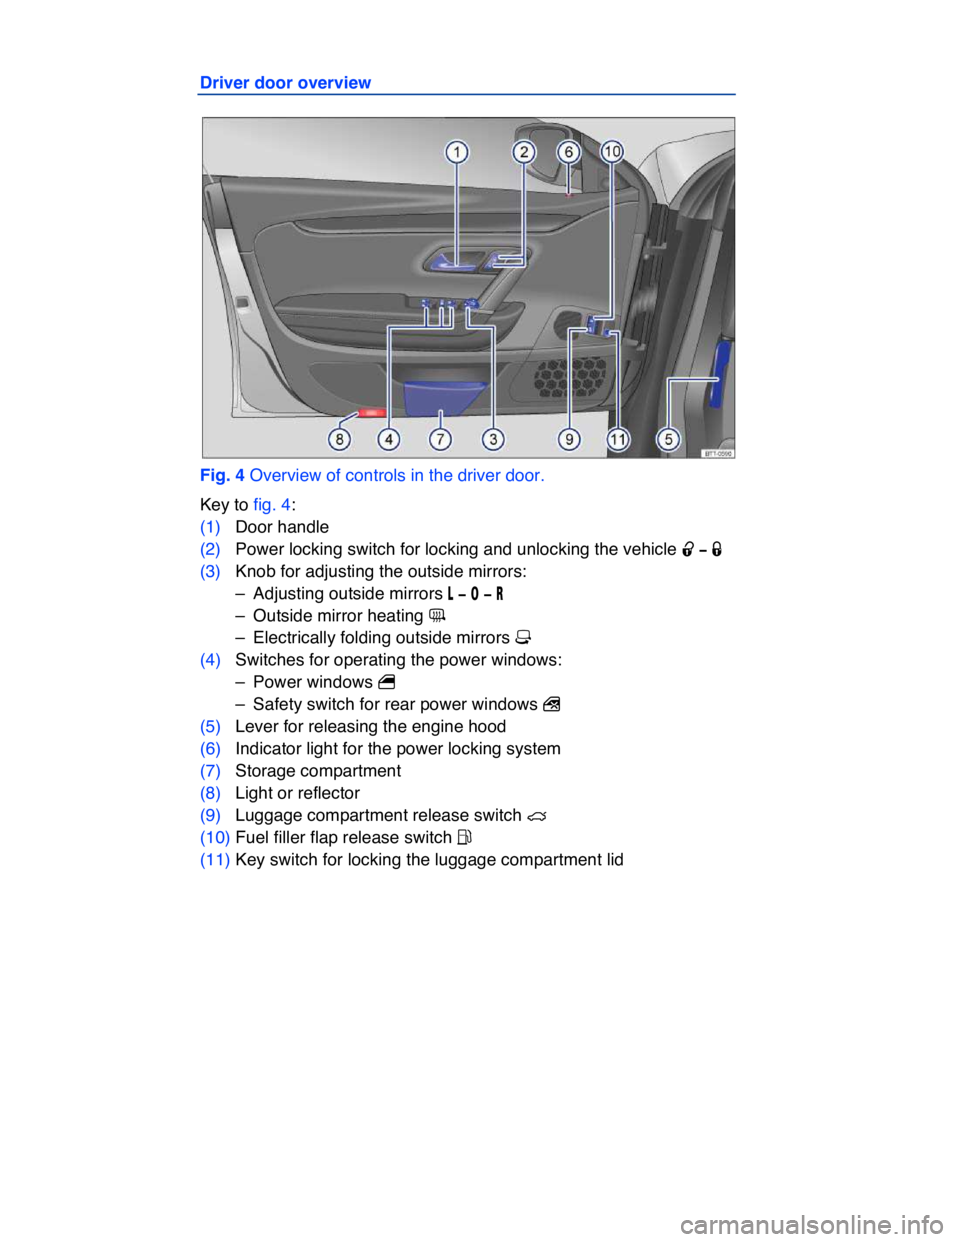 VOLKSWAGEN CC 2009  Owners Manual  
Driver door overview 
 
Fig. 4 Overview of controls in the driver door. 
Key to fig. 4: 
(1) Door handle  
(2) Power locking switch for locking and unlocking the vehicle �0 �